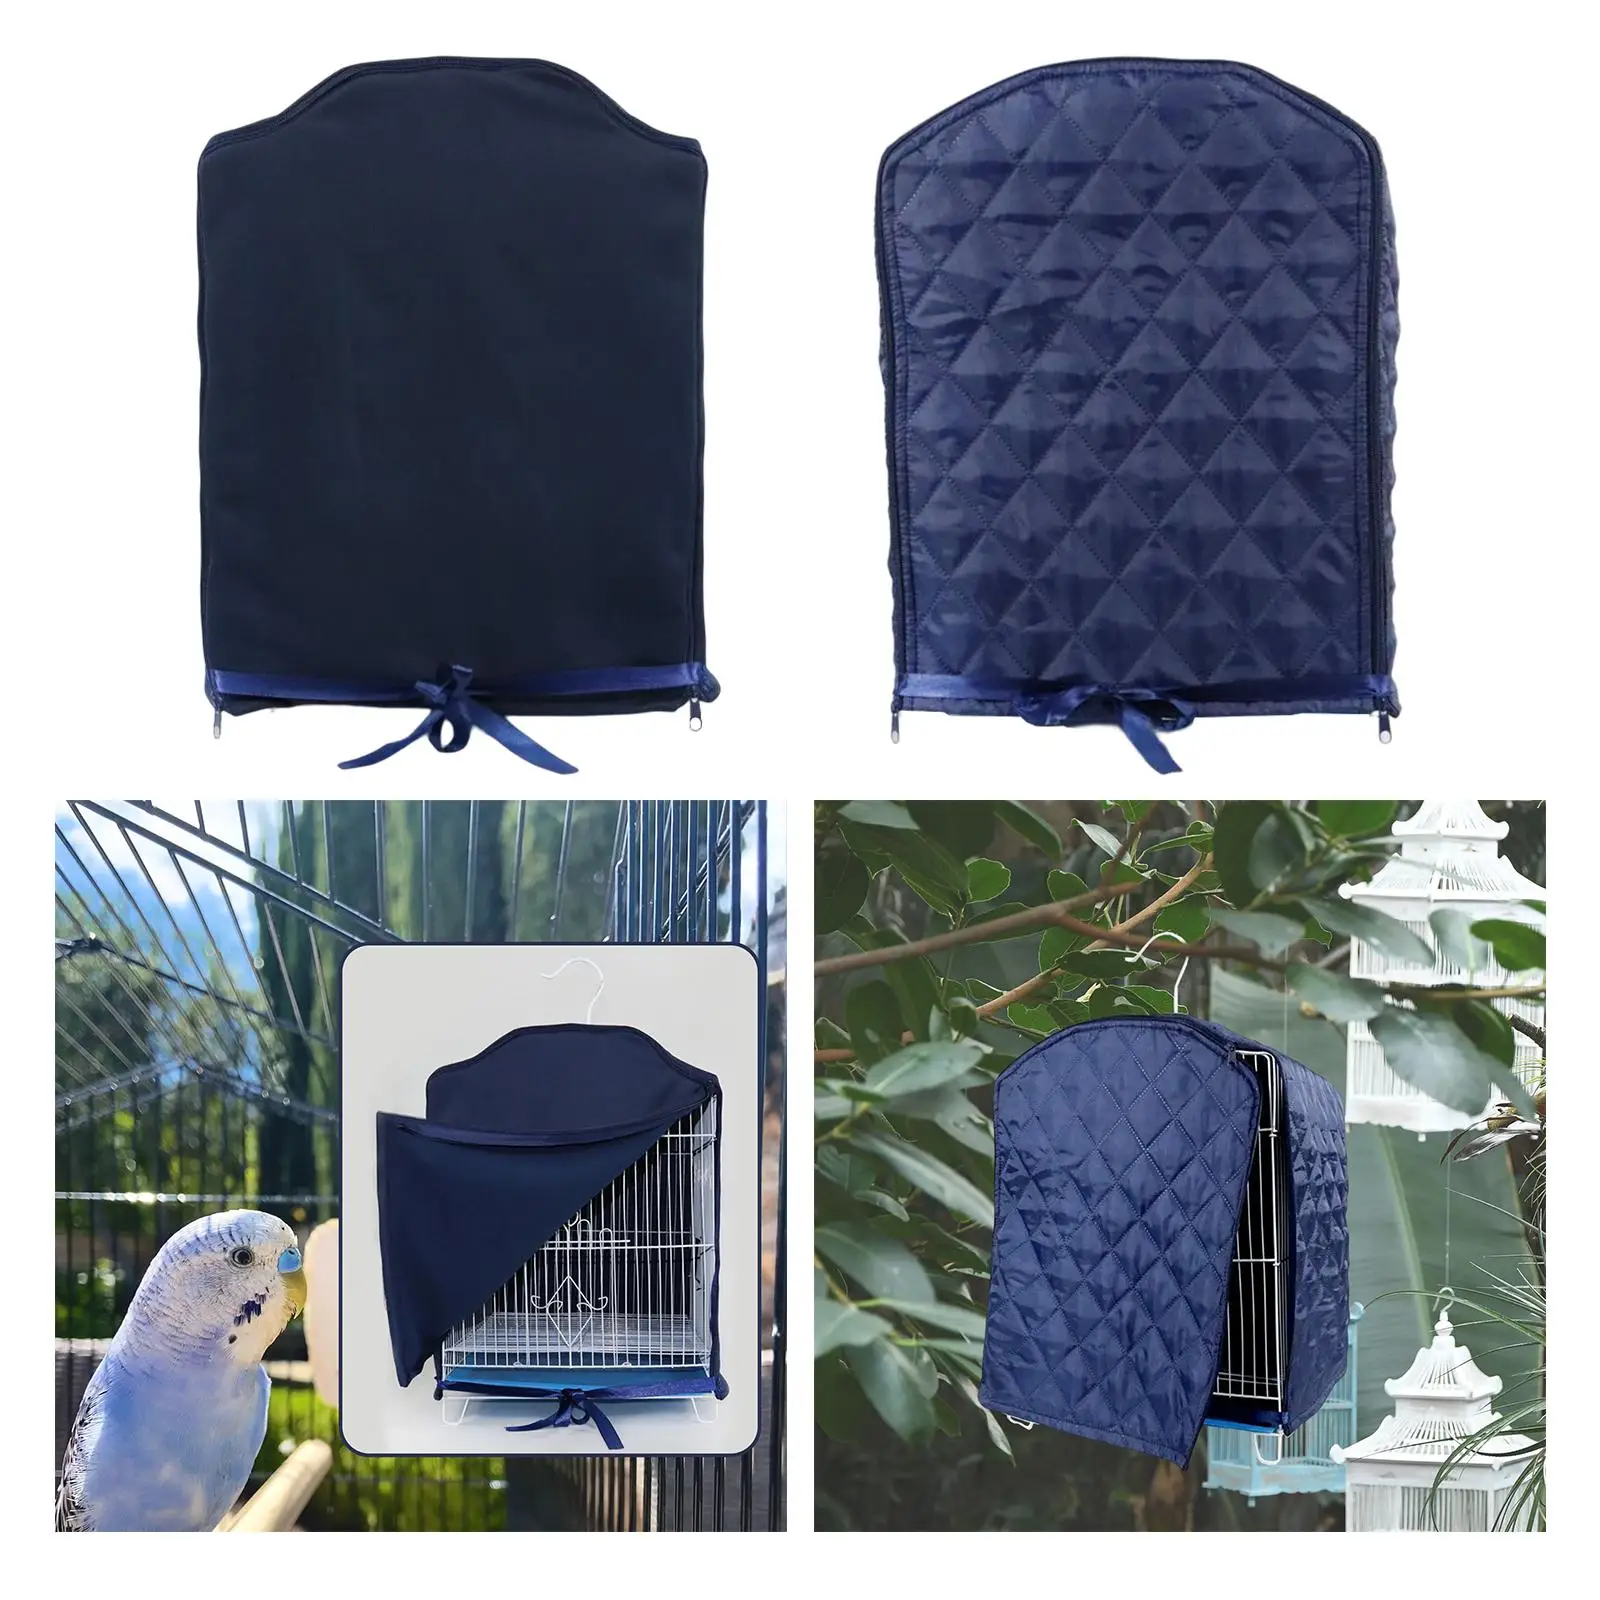 Birdcage Cover Protector Supplies Universal Warm Durable Blackout Cover for Pet Cage